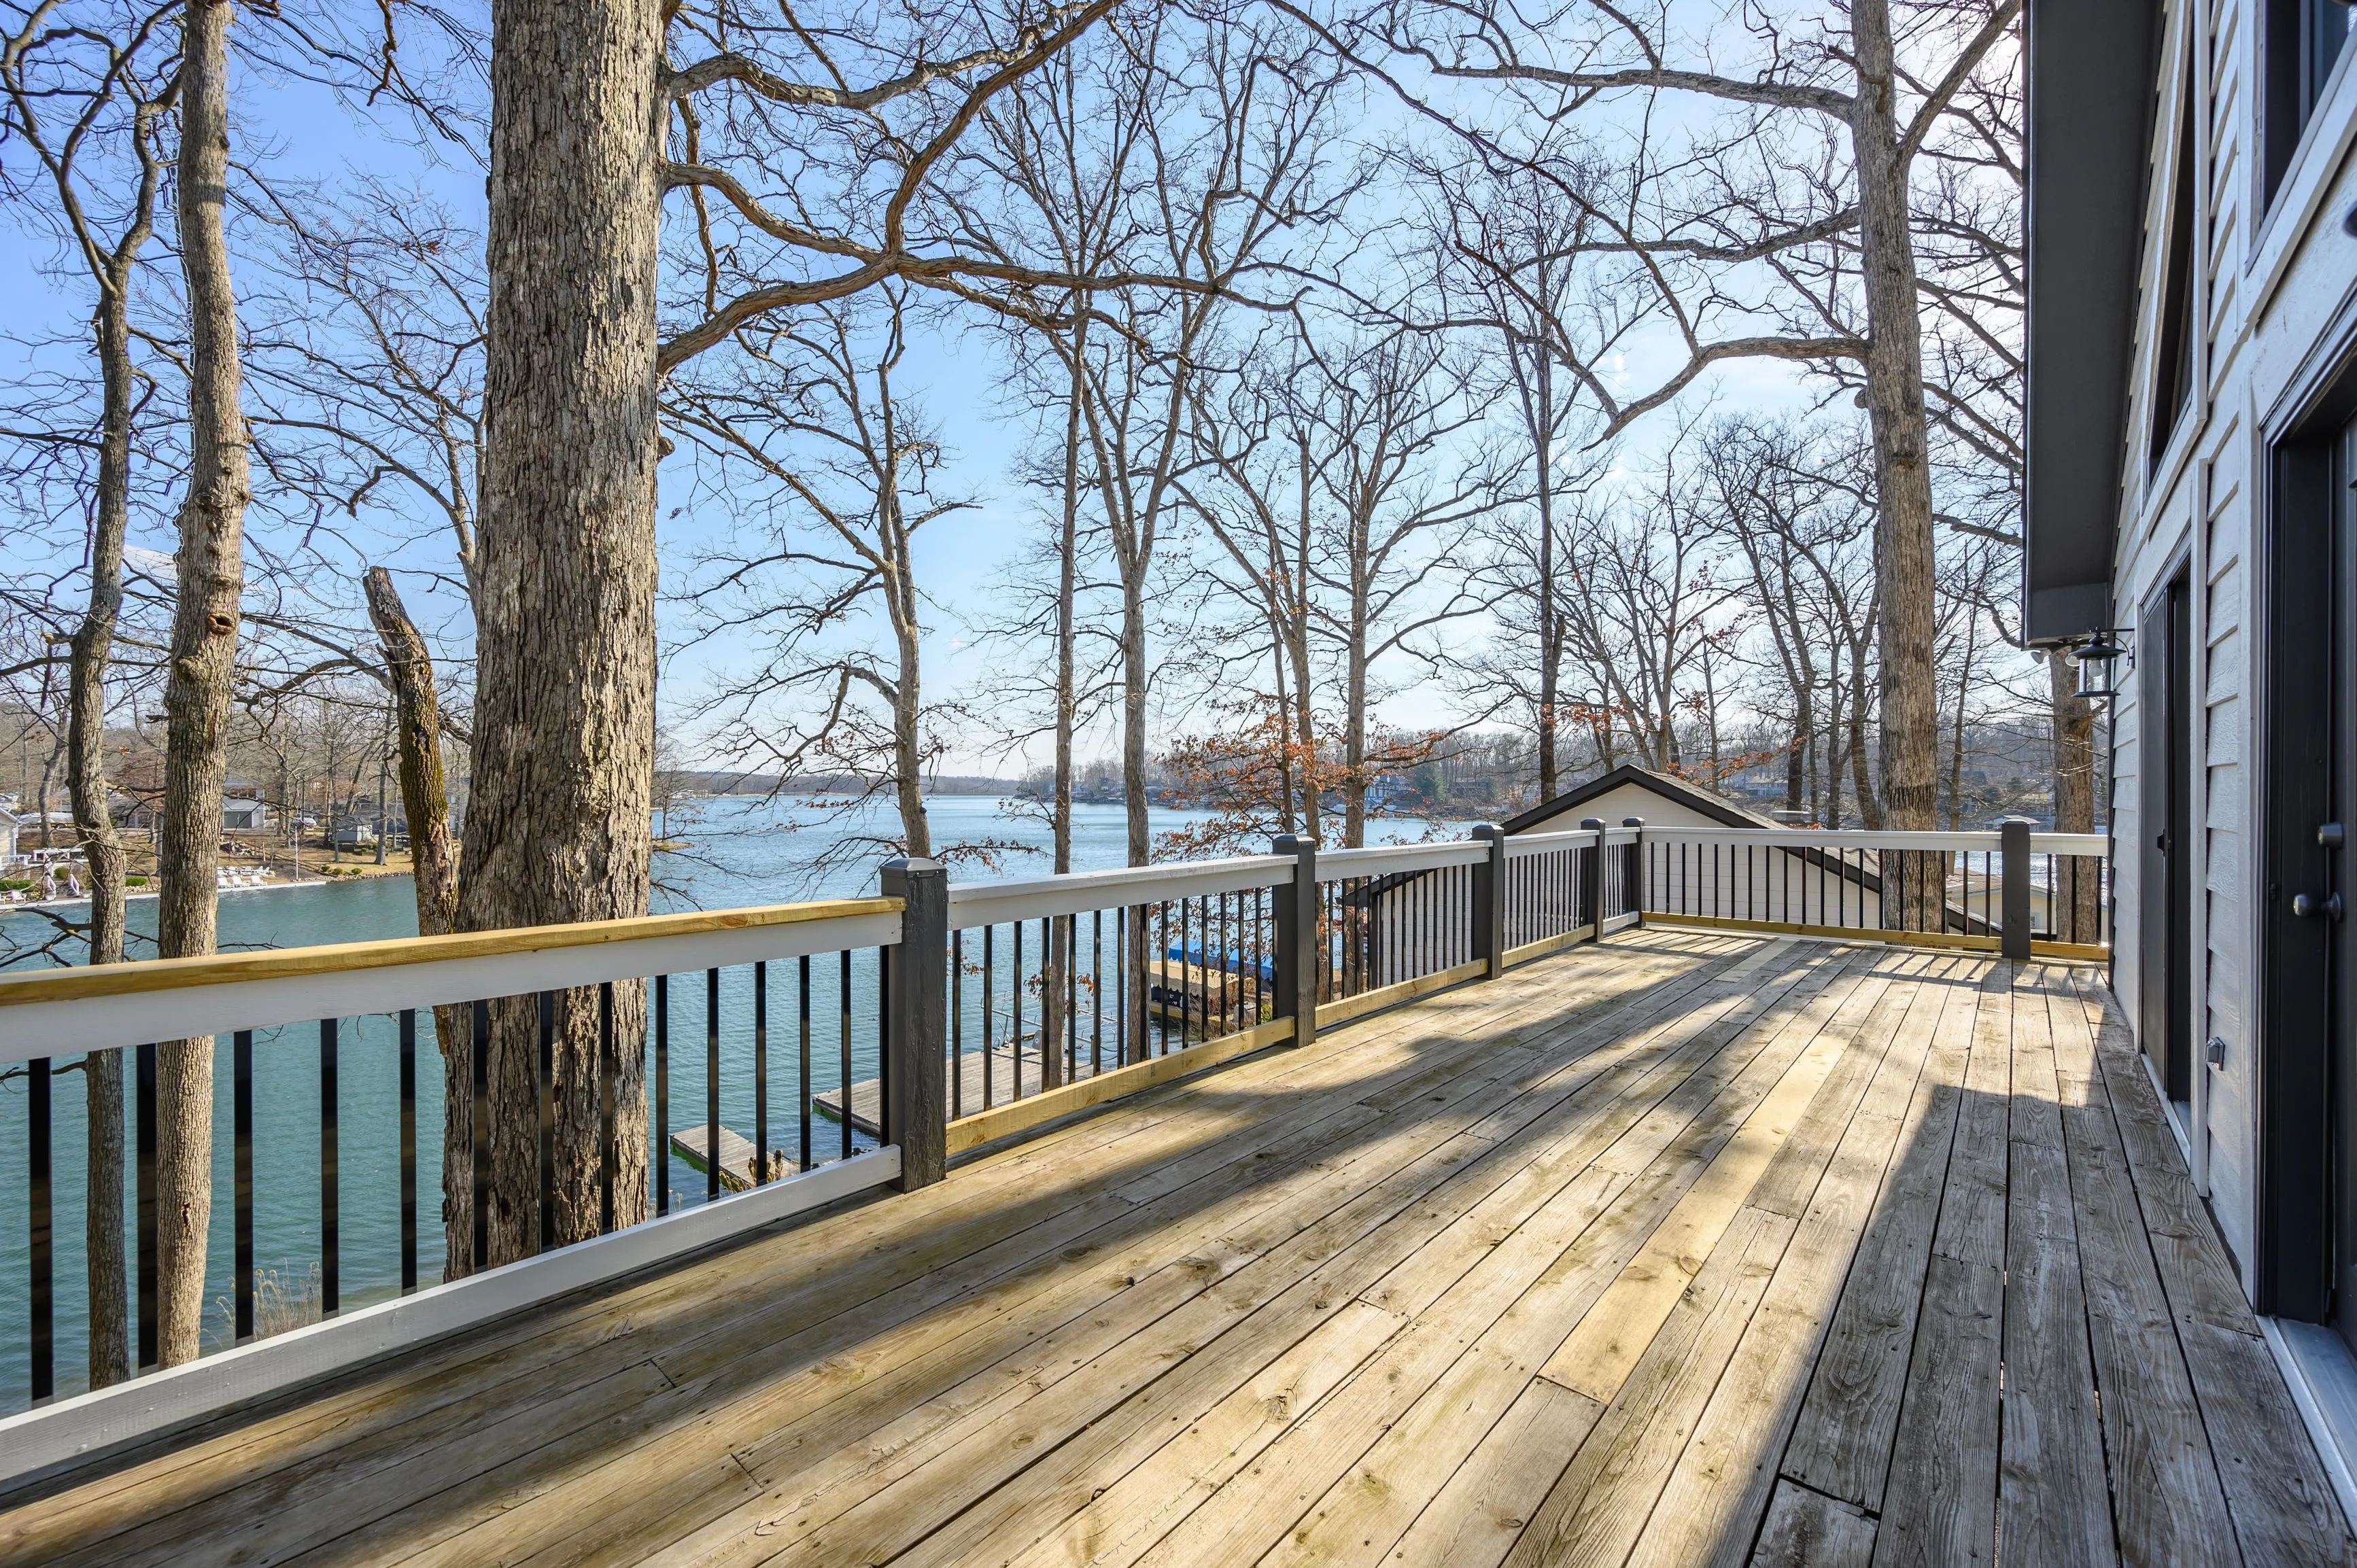 Sunny lakeside wooden deck with railing next to a house, surrounded by bare trees with a clear blue sky.